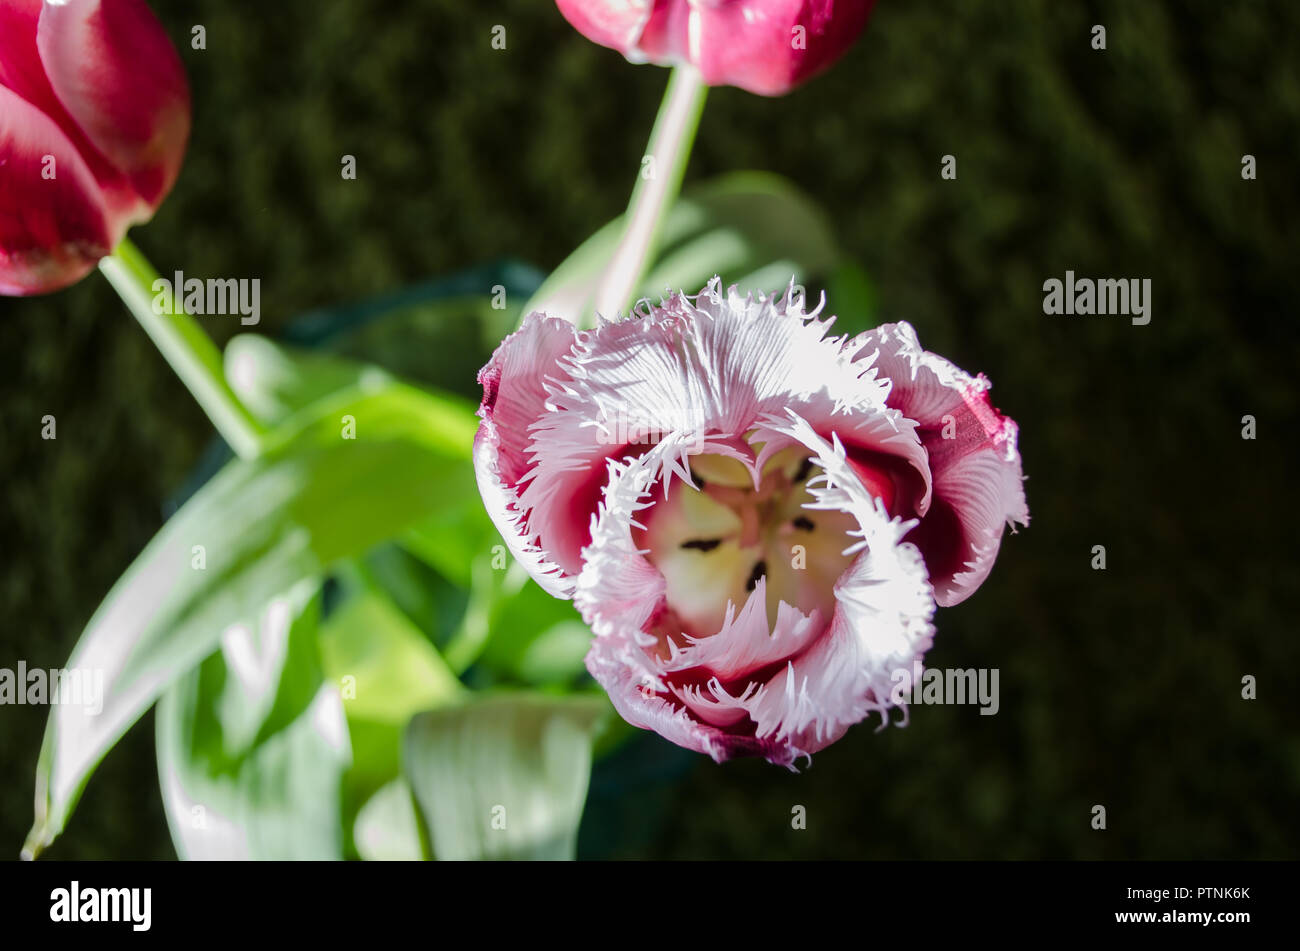 red white tulips with terry petals Stock Photo